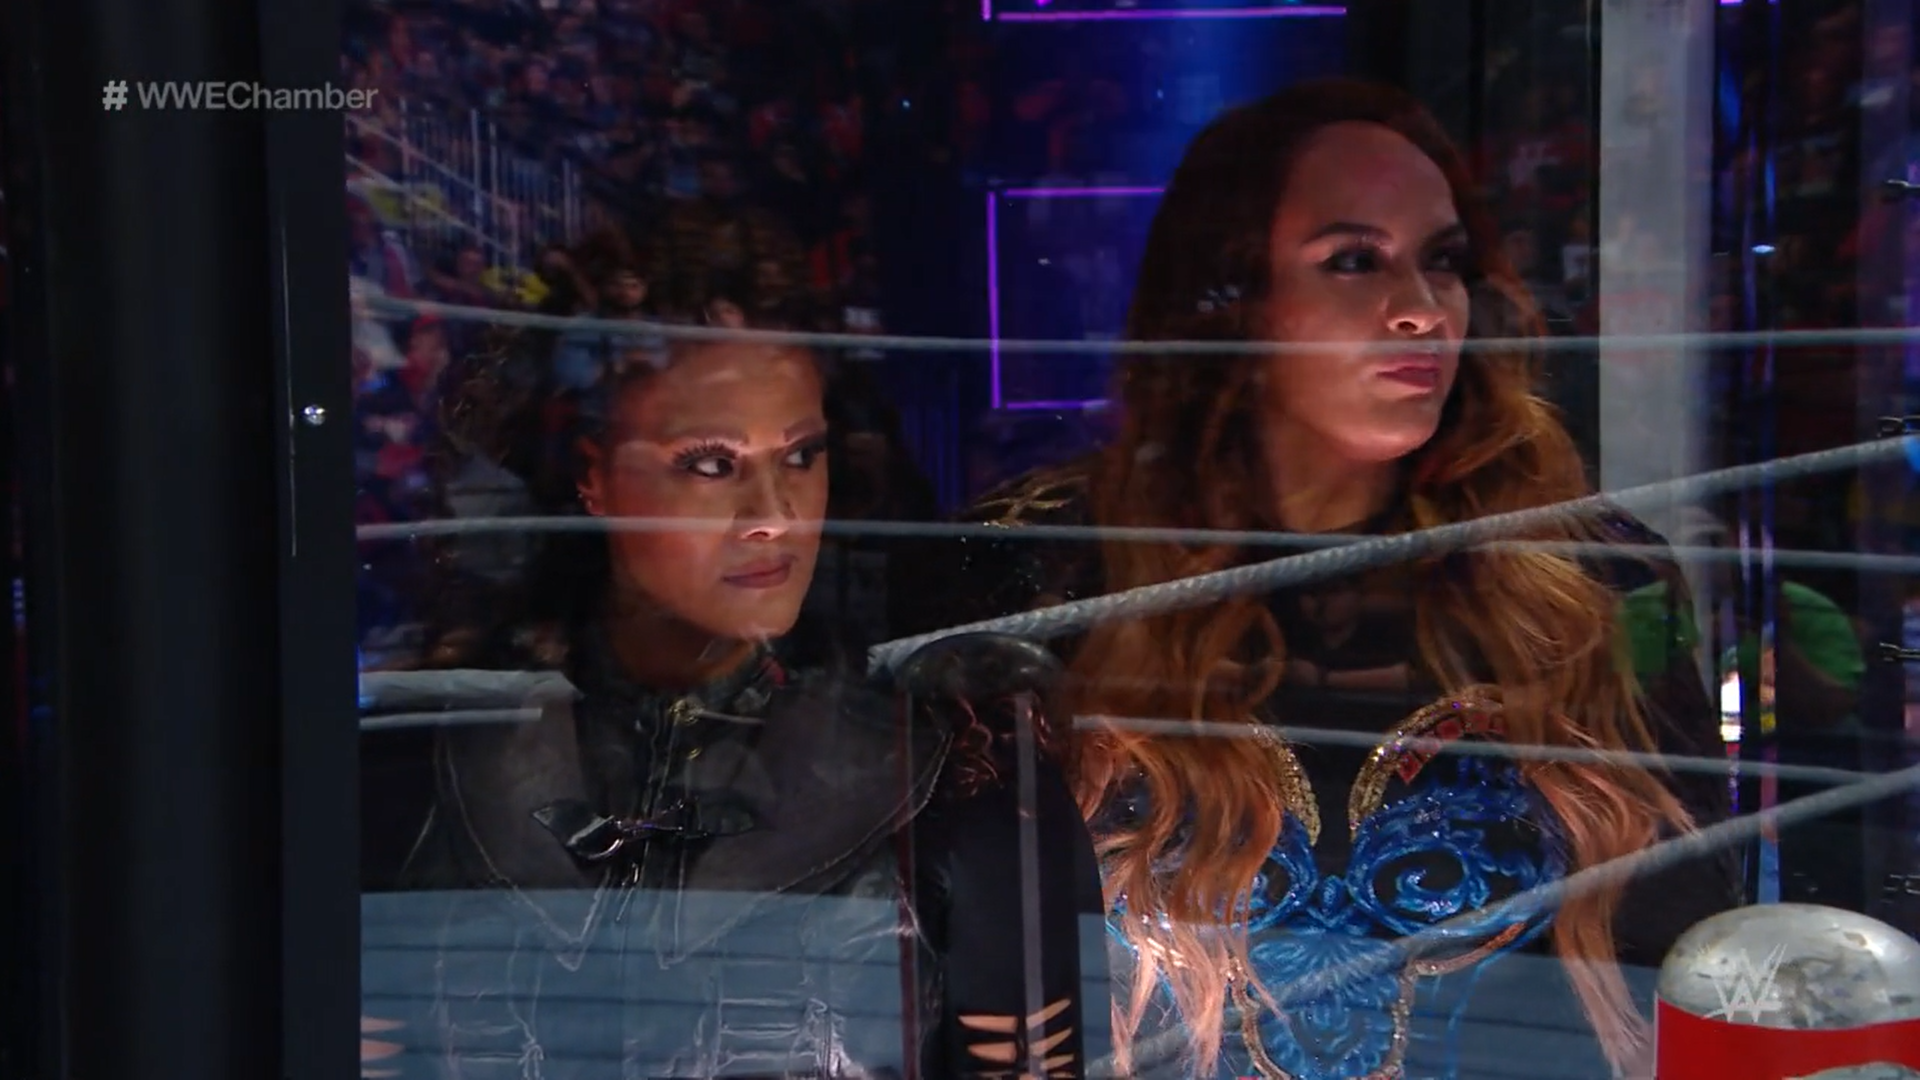 Jax and Tamina look fierce as they stand inside of their Chamber pods.